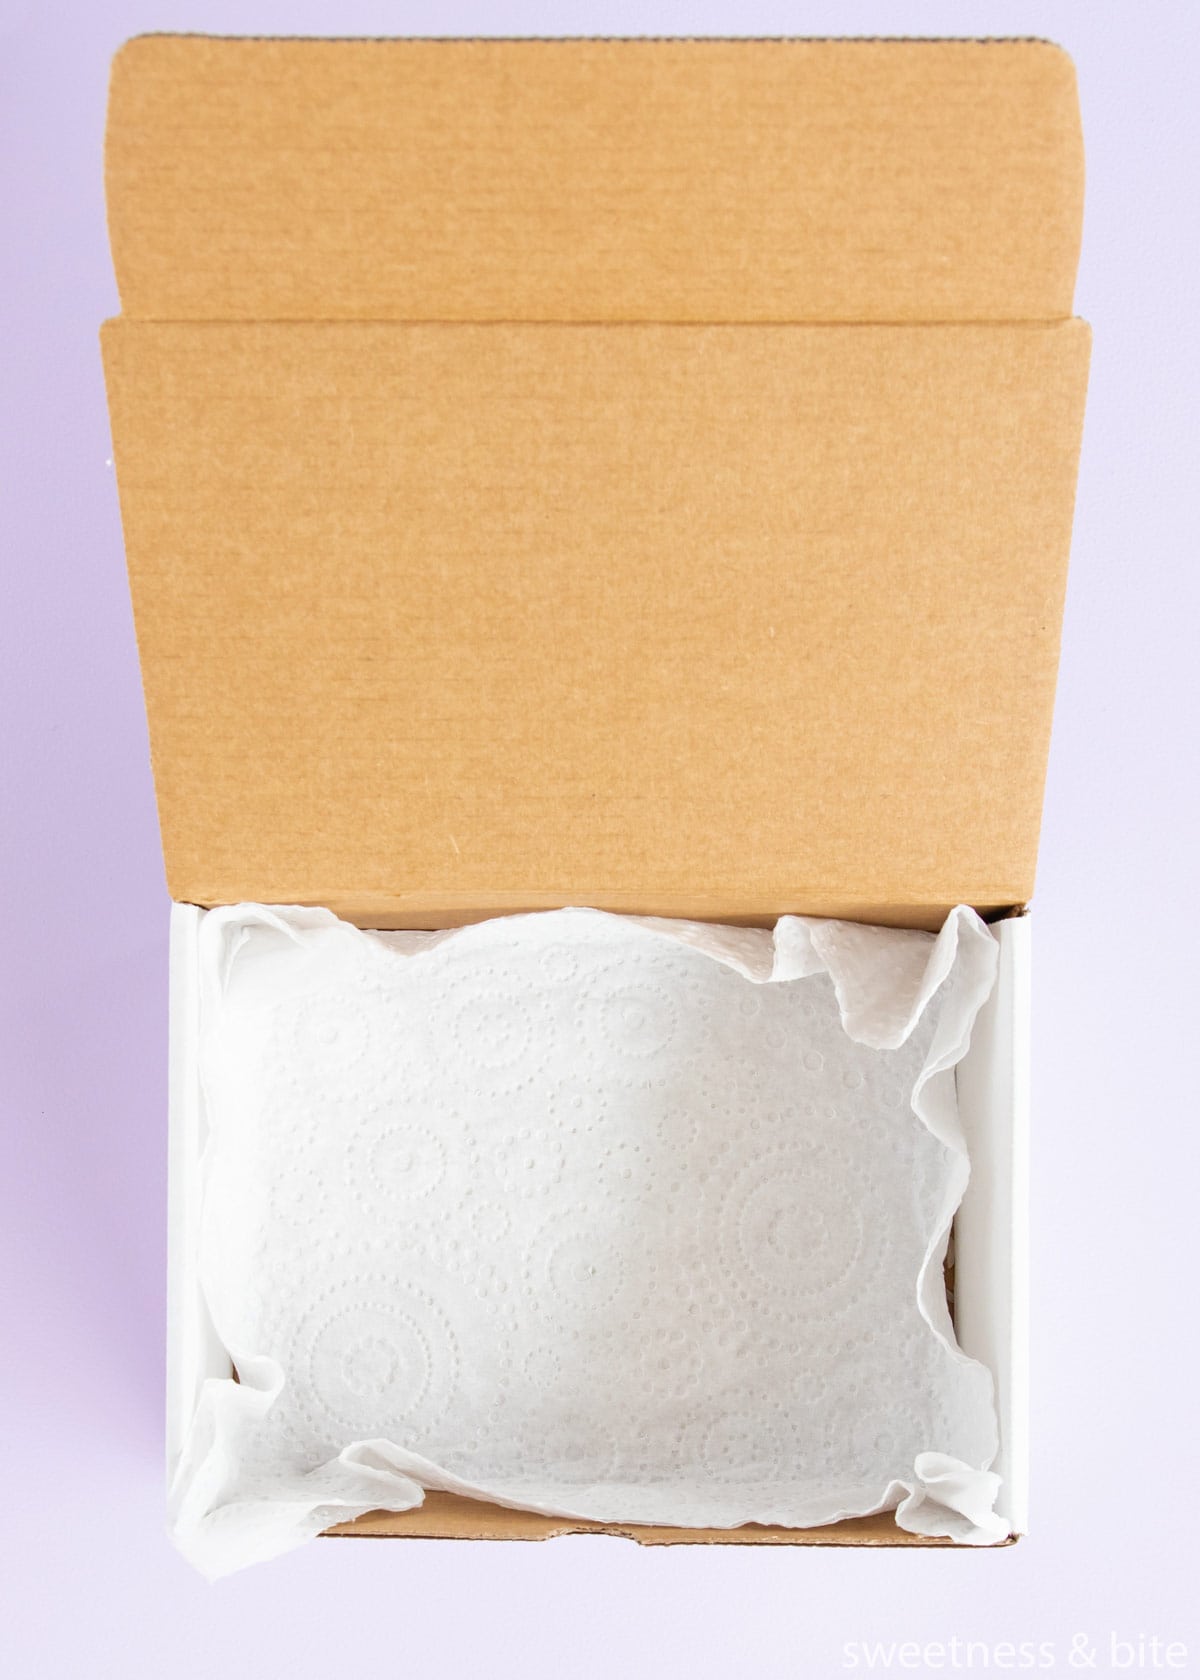 A box lined with a paper towel.